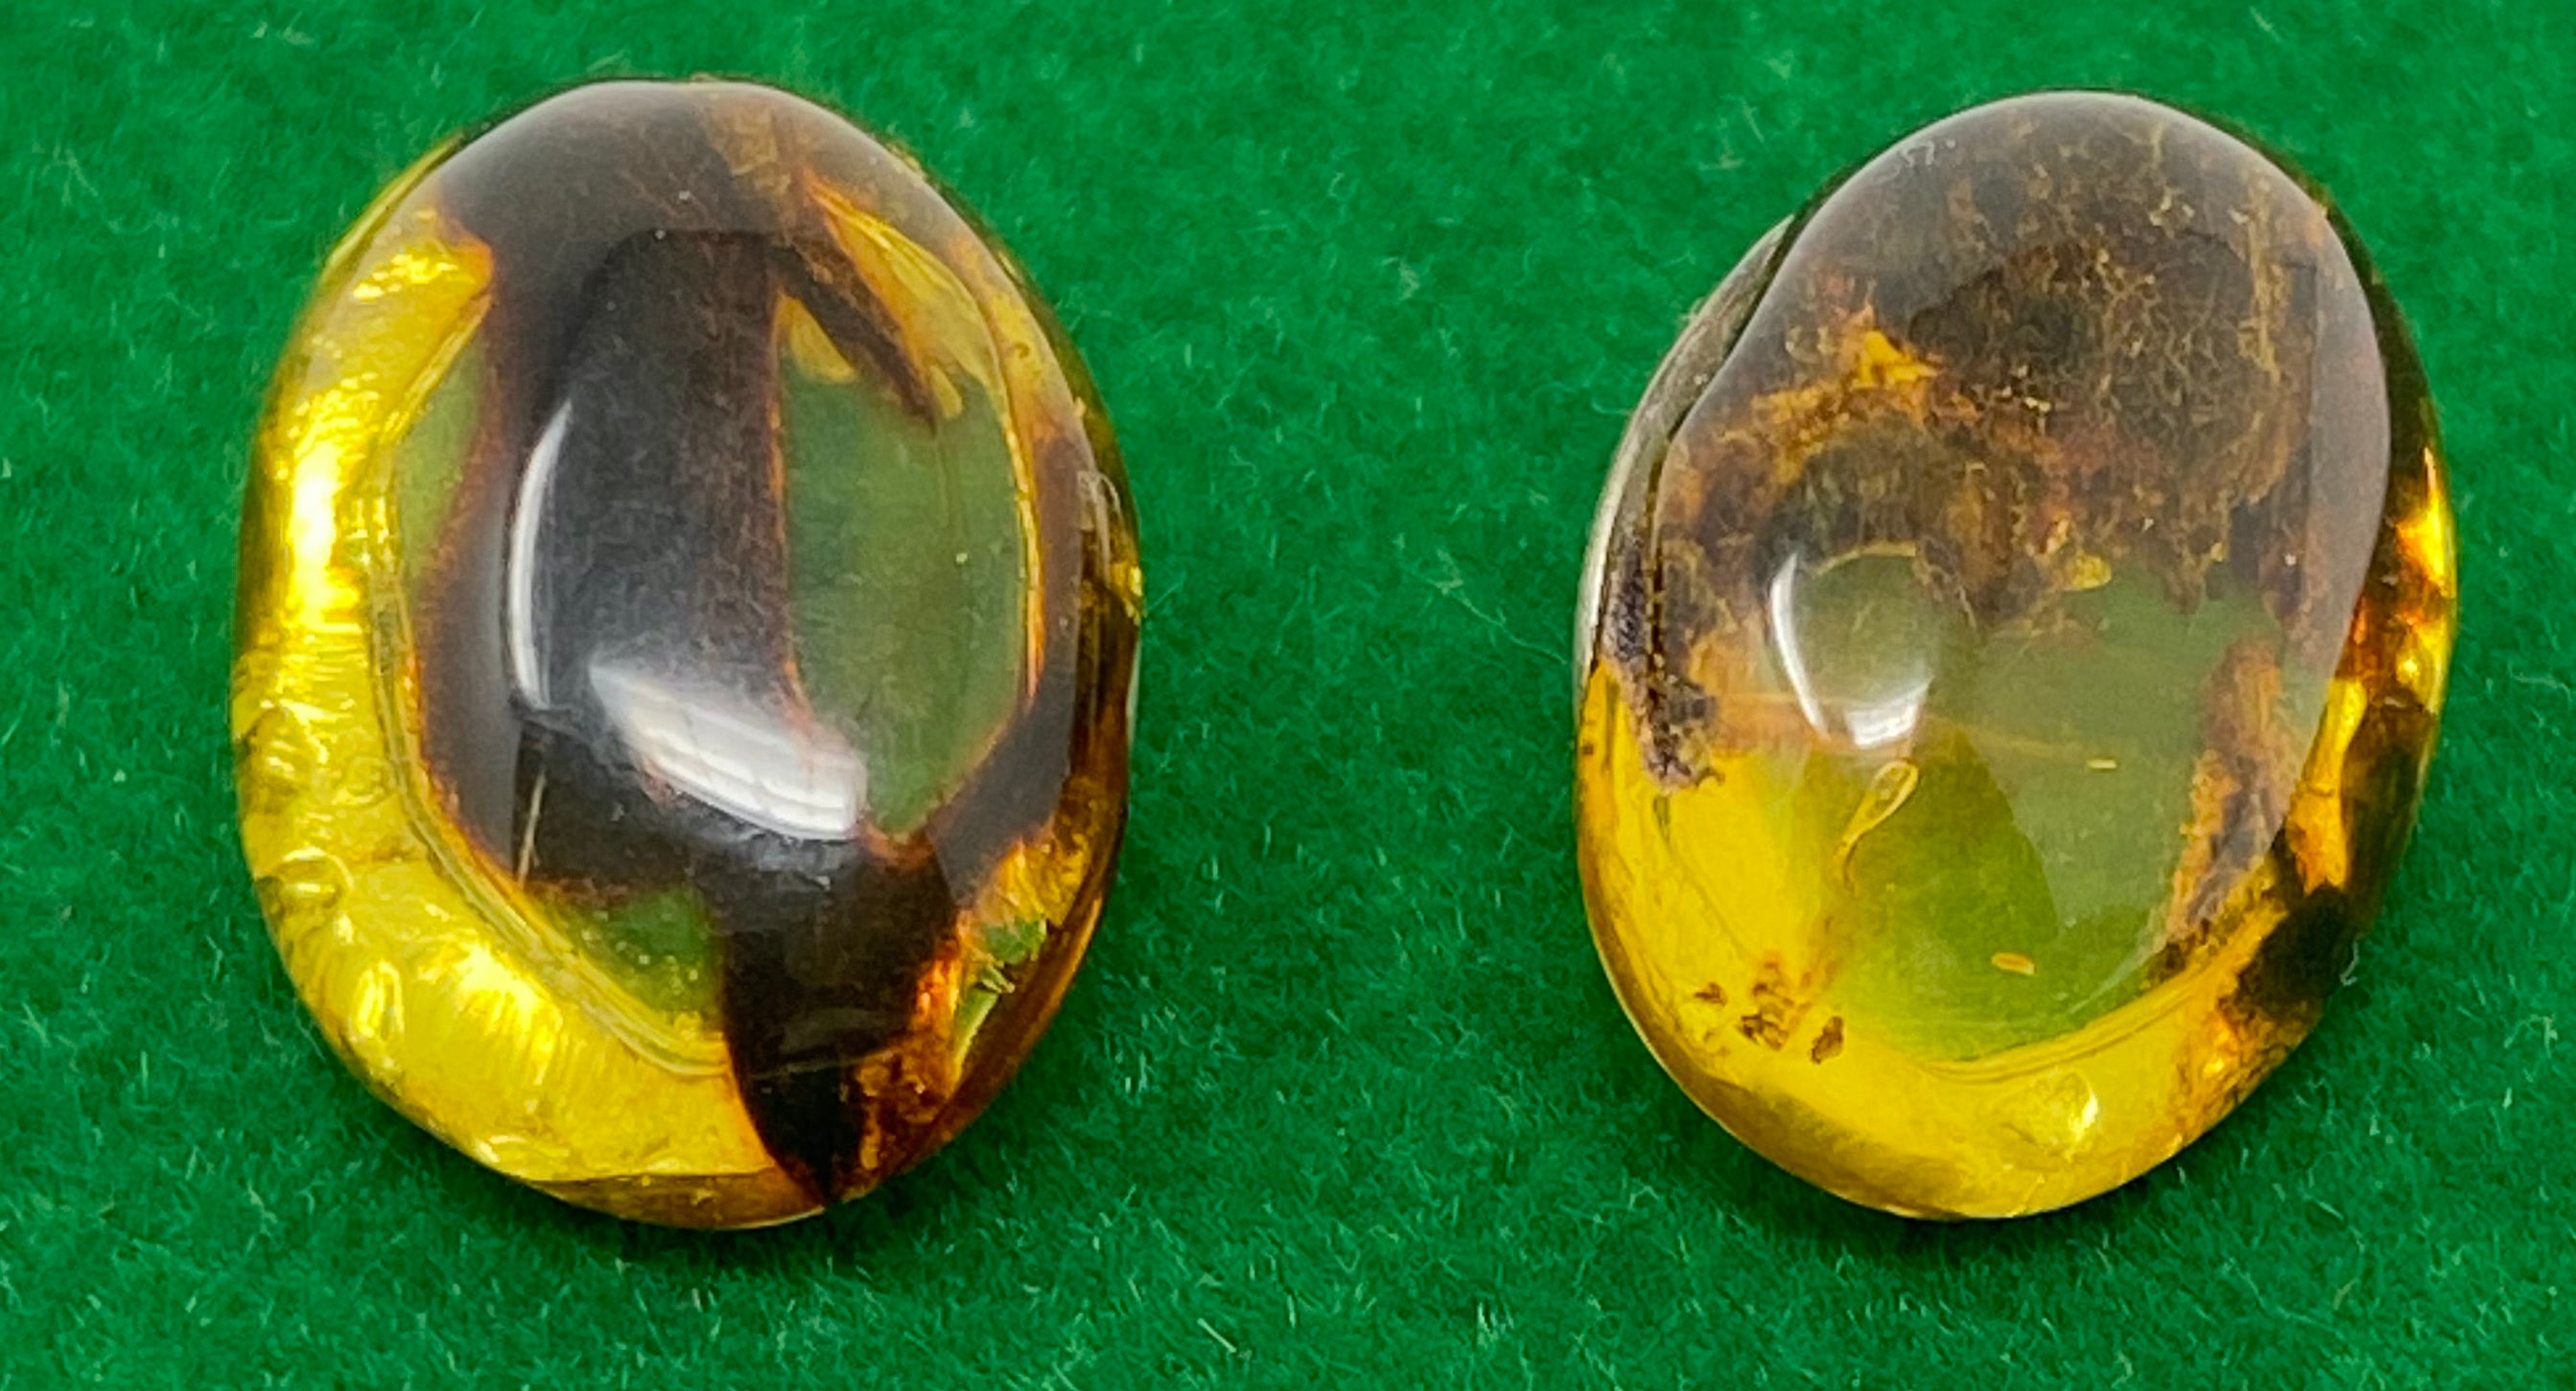 Silver and Amber Fossil Stud Earrings